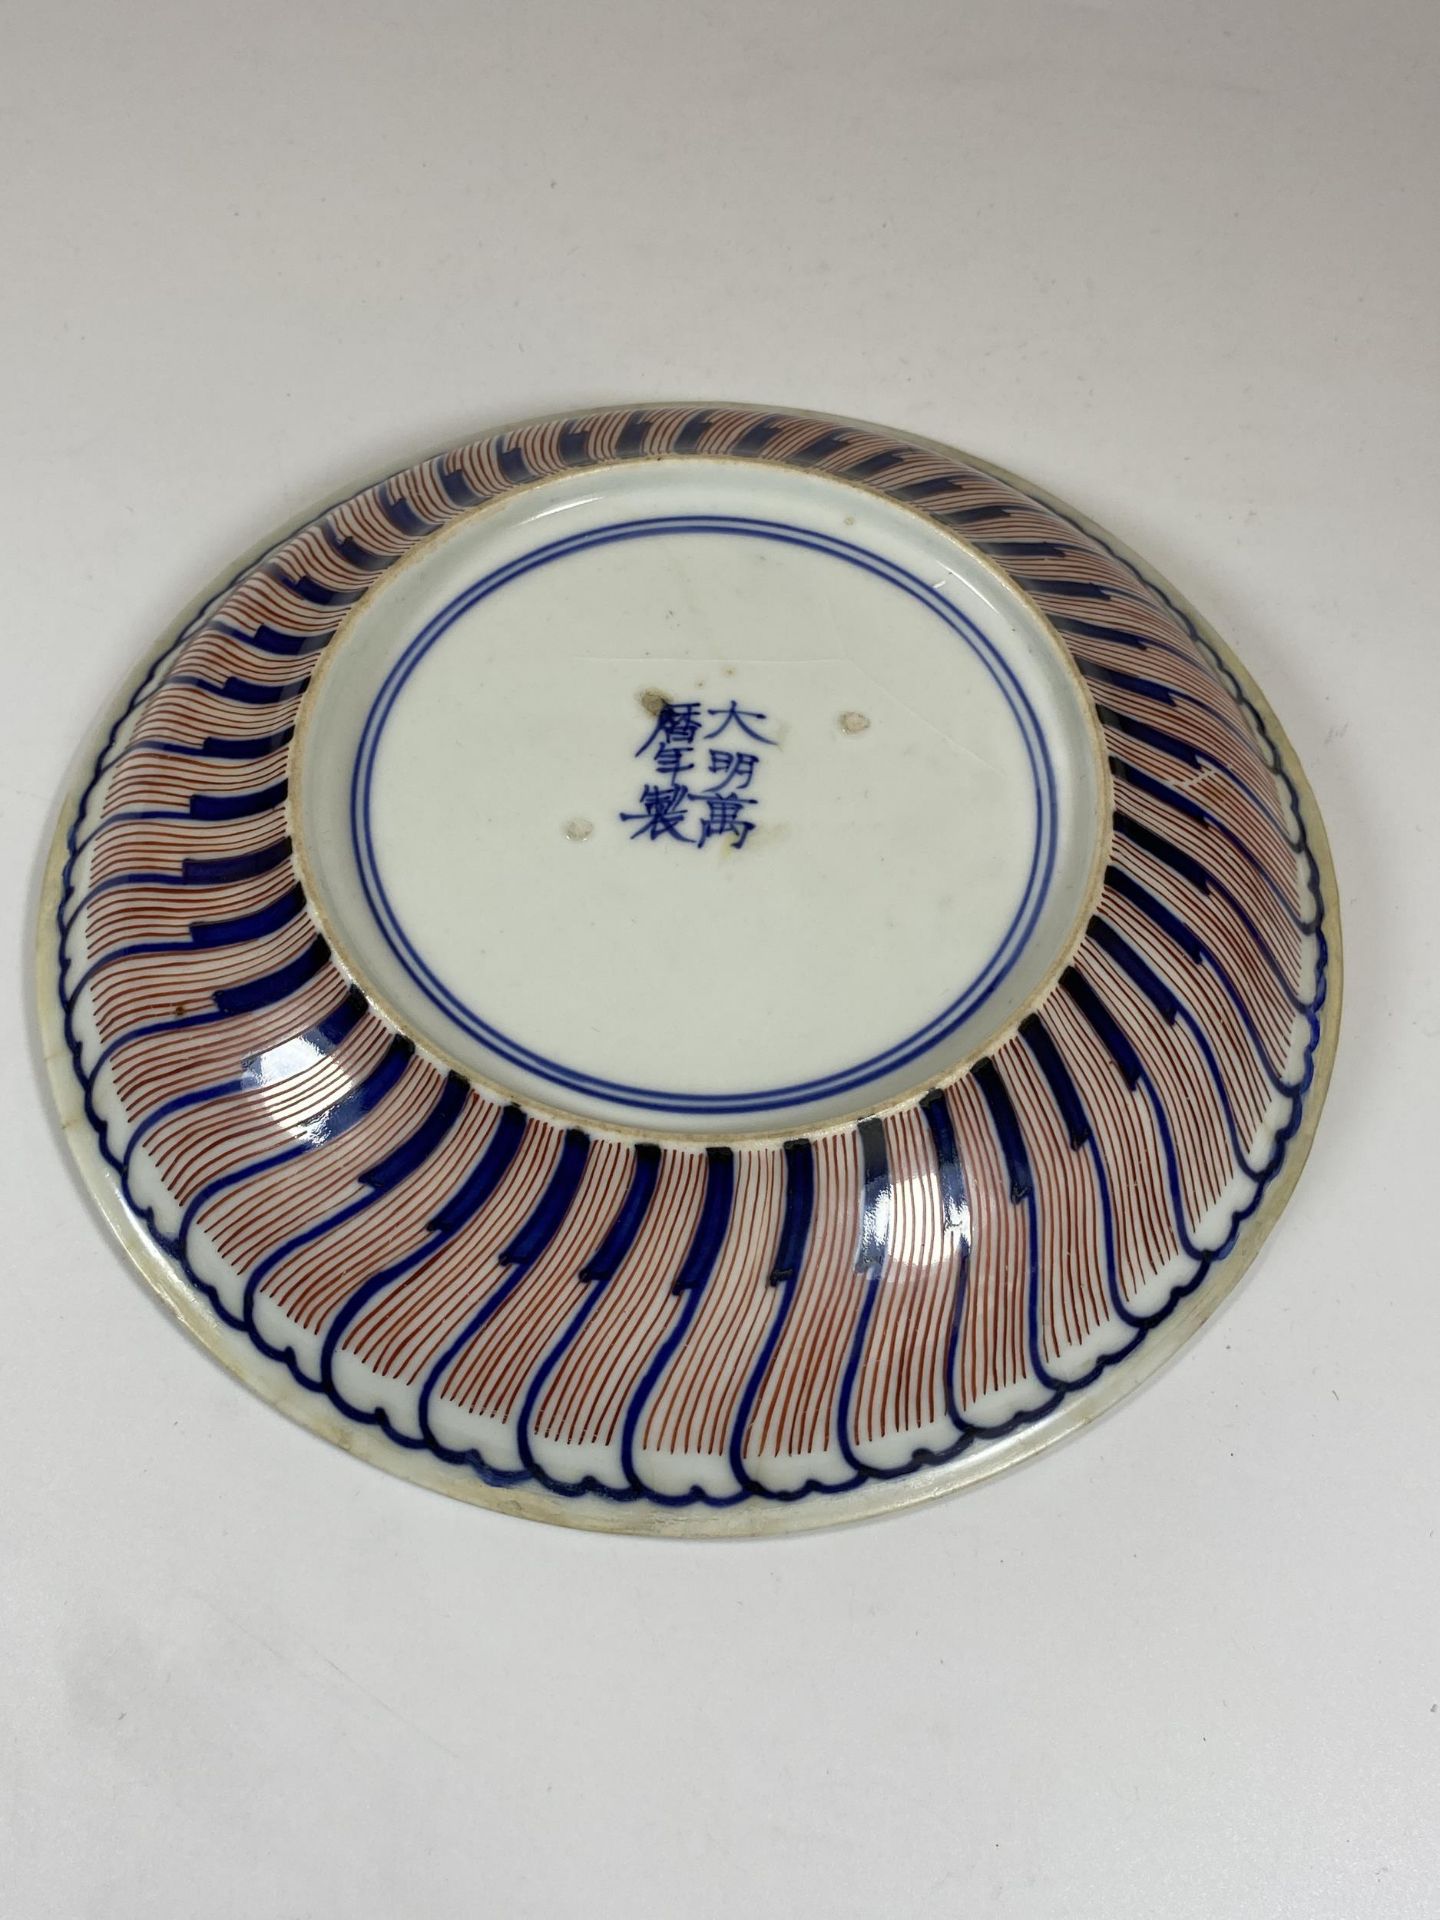 A JAPANESE MEIJI PERIOD (1868-1912) IMARI ON BLUE GROUND FLORAL PATTERN DISH, SIX CHARACTER MARK - Image 4 of 5